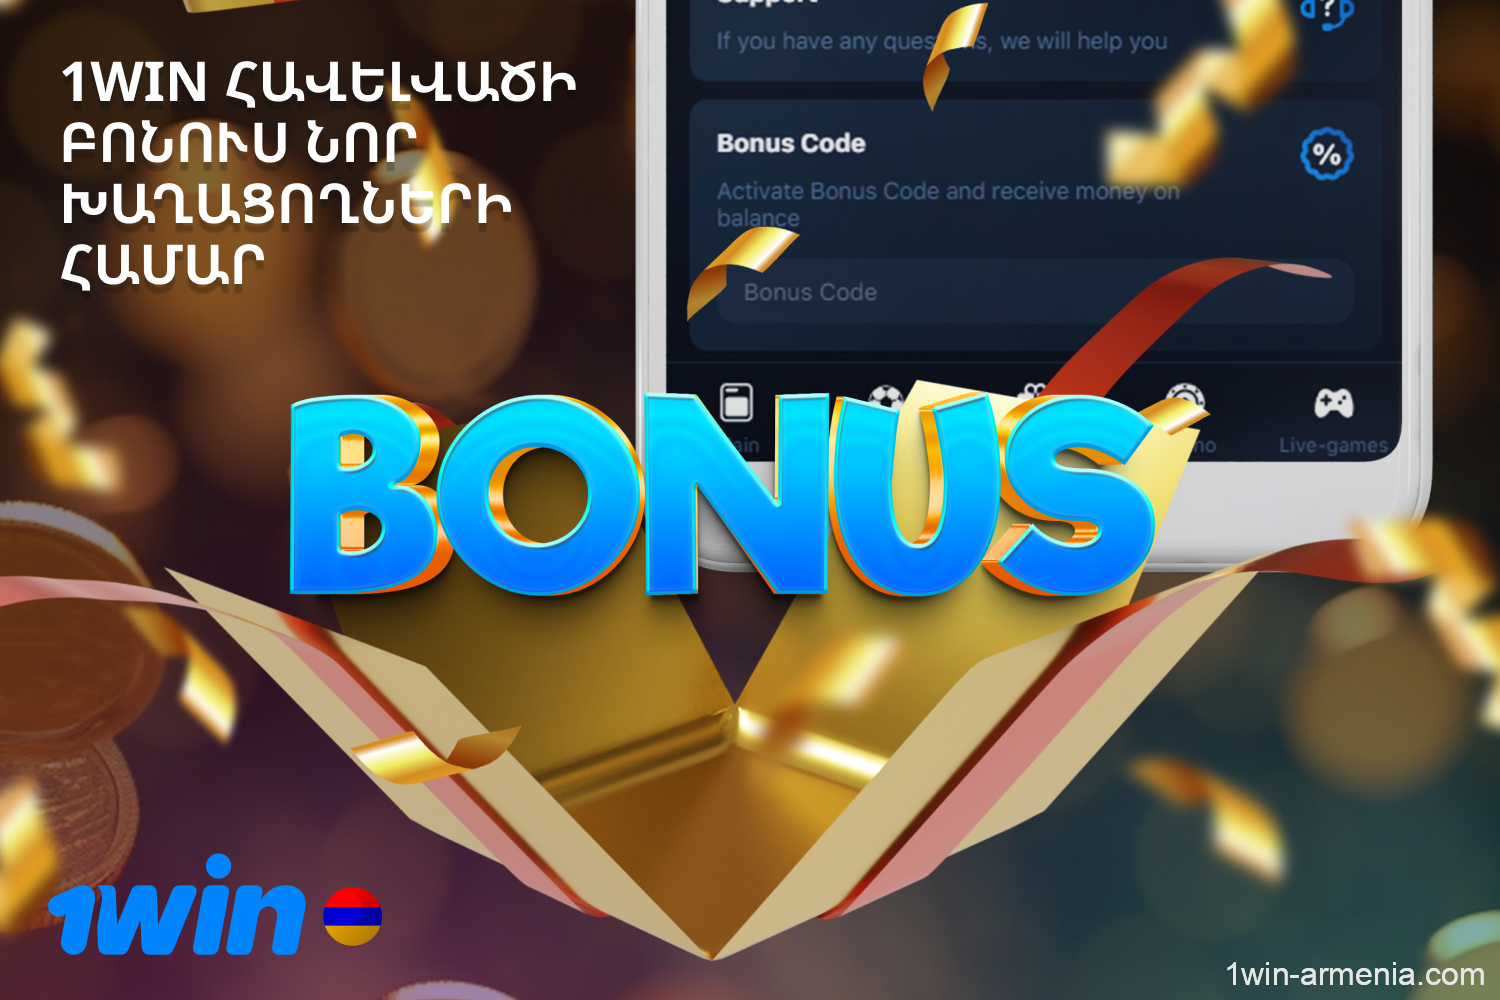 All bonuses and promotions are available to users from Armenia in the 1win application